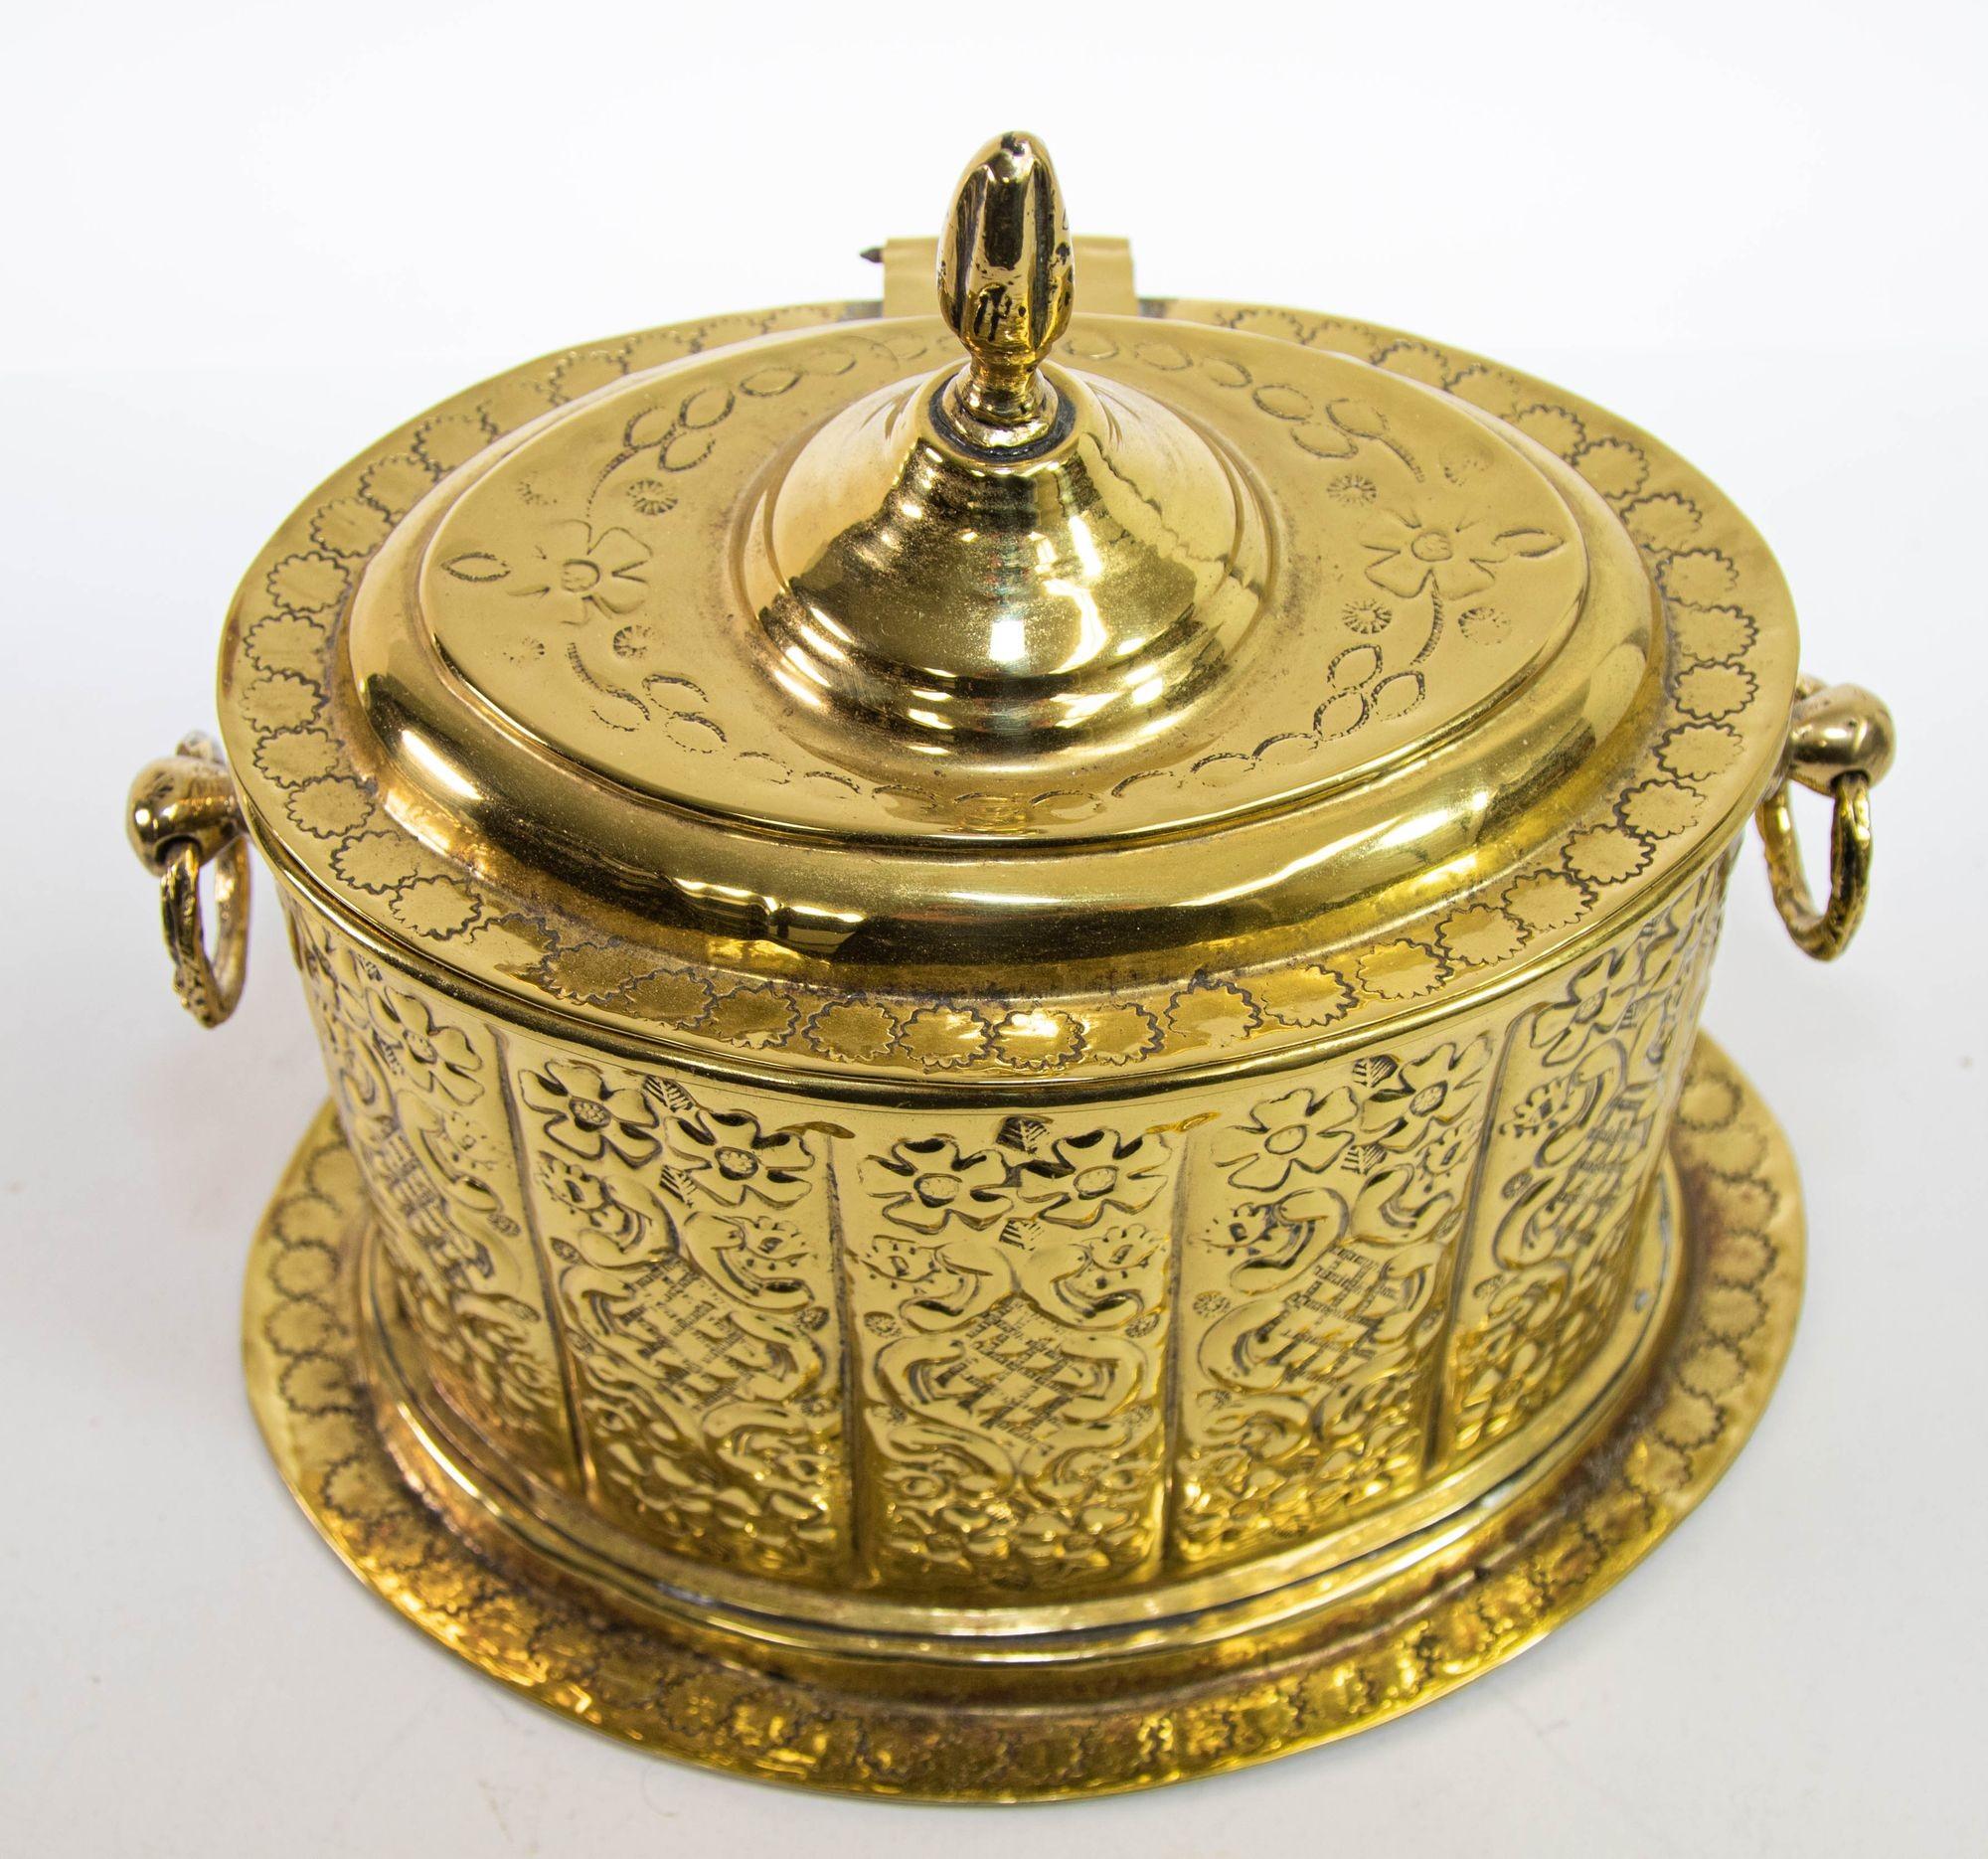 Antique Moroccan Polished Gold Brass Tea Canister Box.
Antique Moroccan hand-hammered tea caddy box constructed of solid brass and silver.
Exhibiting an intricate Arabesque design and ornate hand-engraved details.
1940s Antique Moroccan Silver